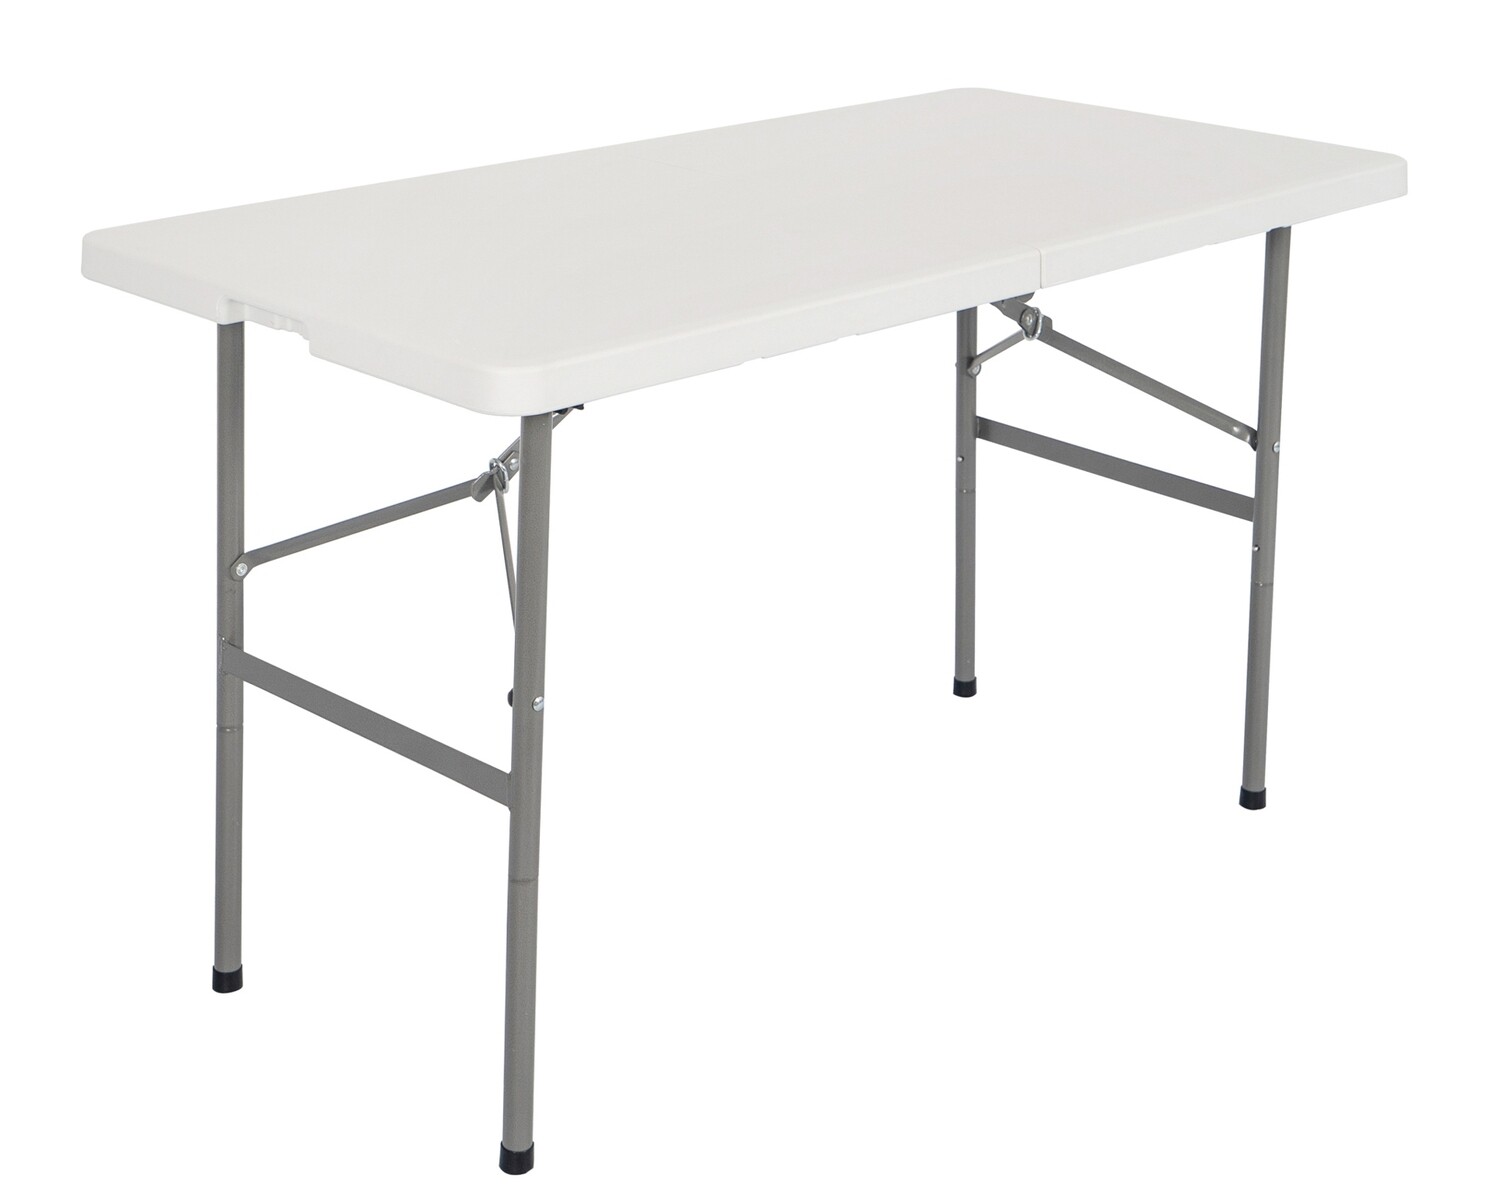 Ofix 4FT Folding in Half Table (White)